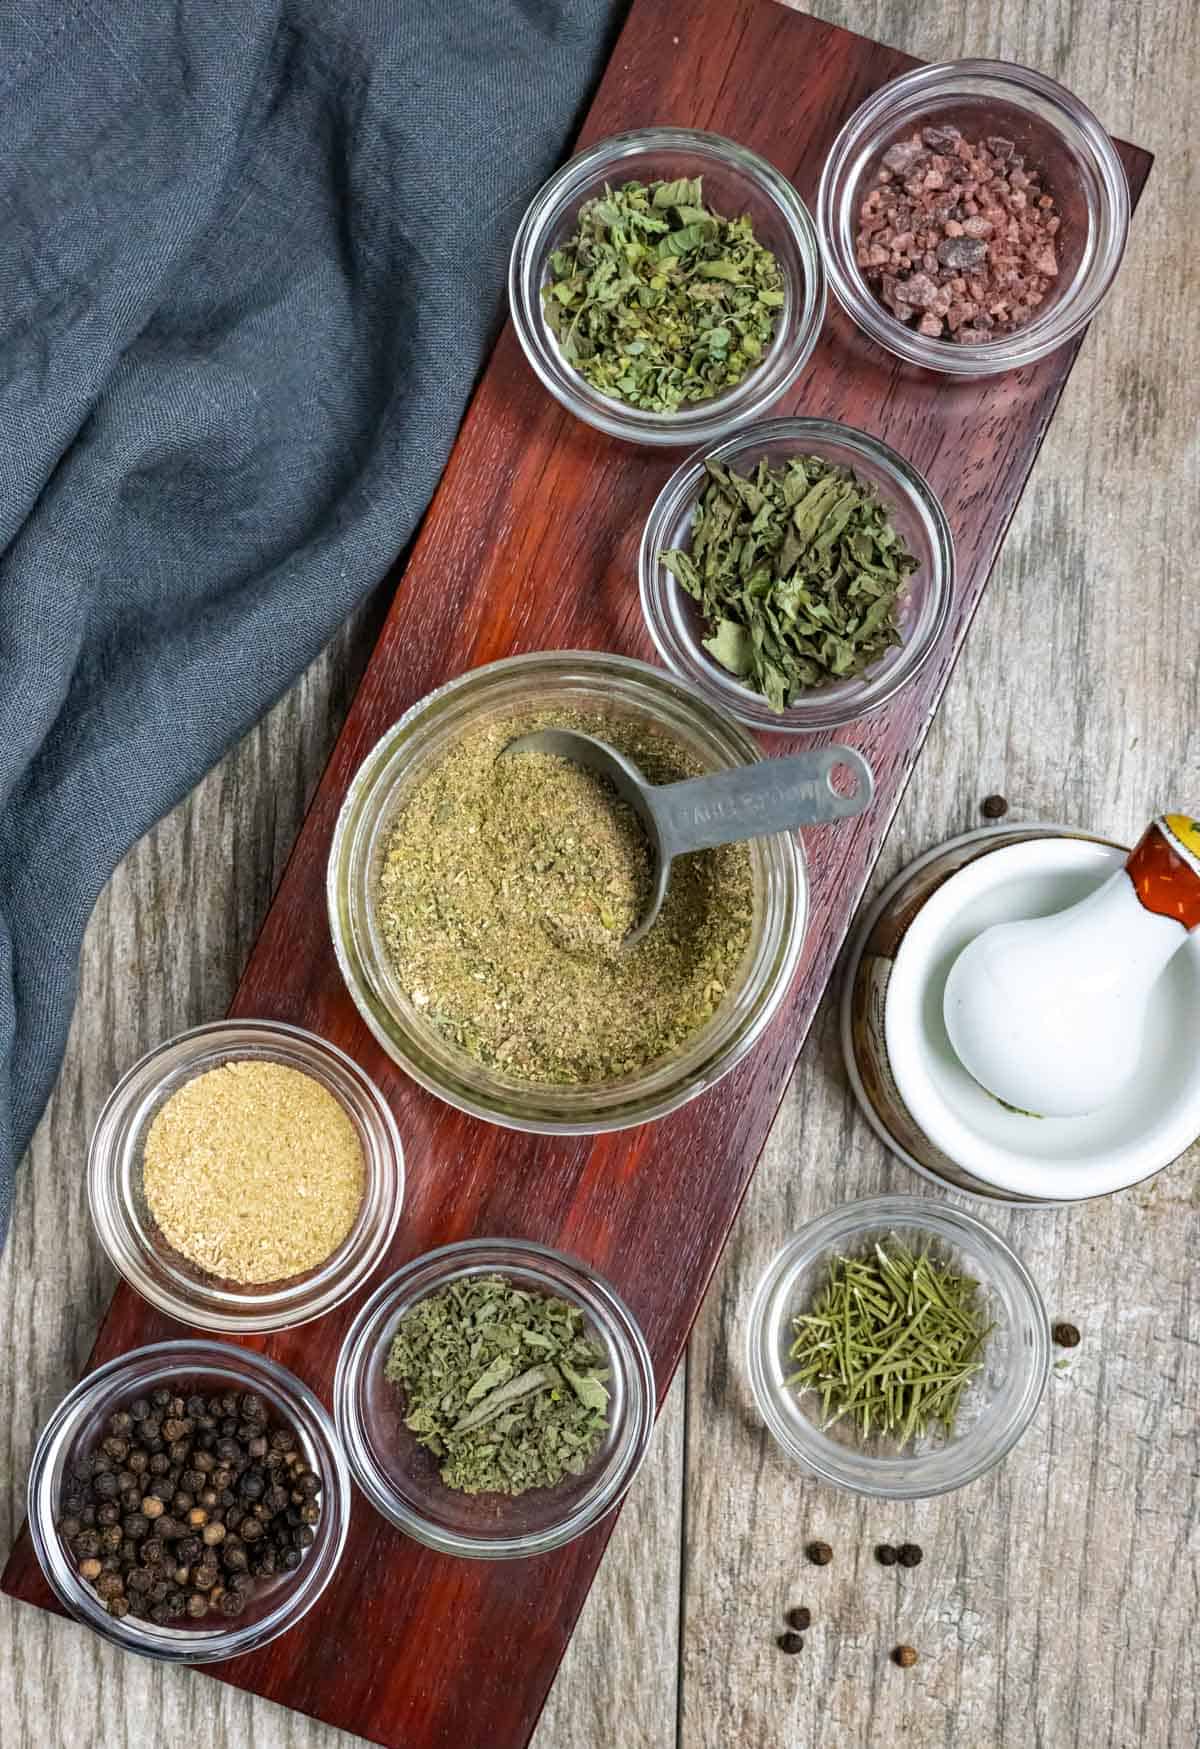 Angled dark narrow red-brown board with small glass bowls of whole spices and glass jar of ground spice blend in the center.